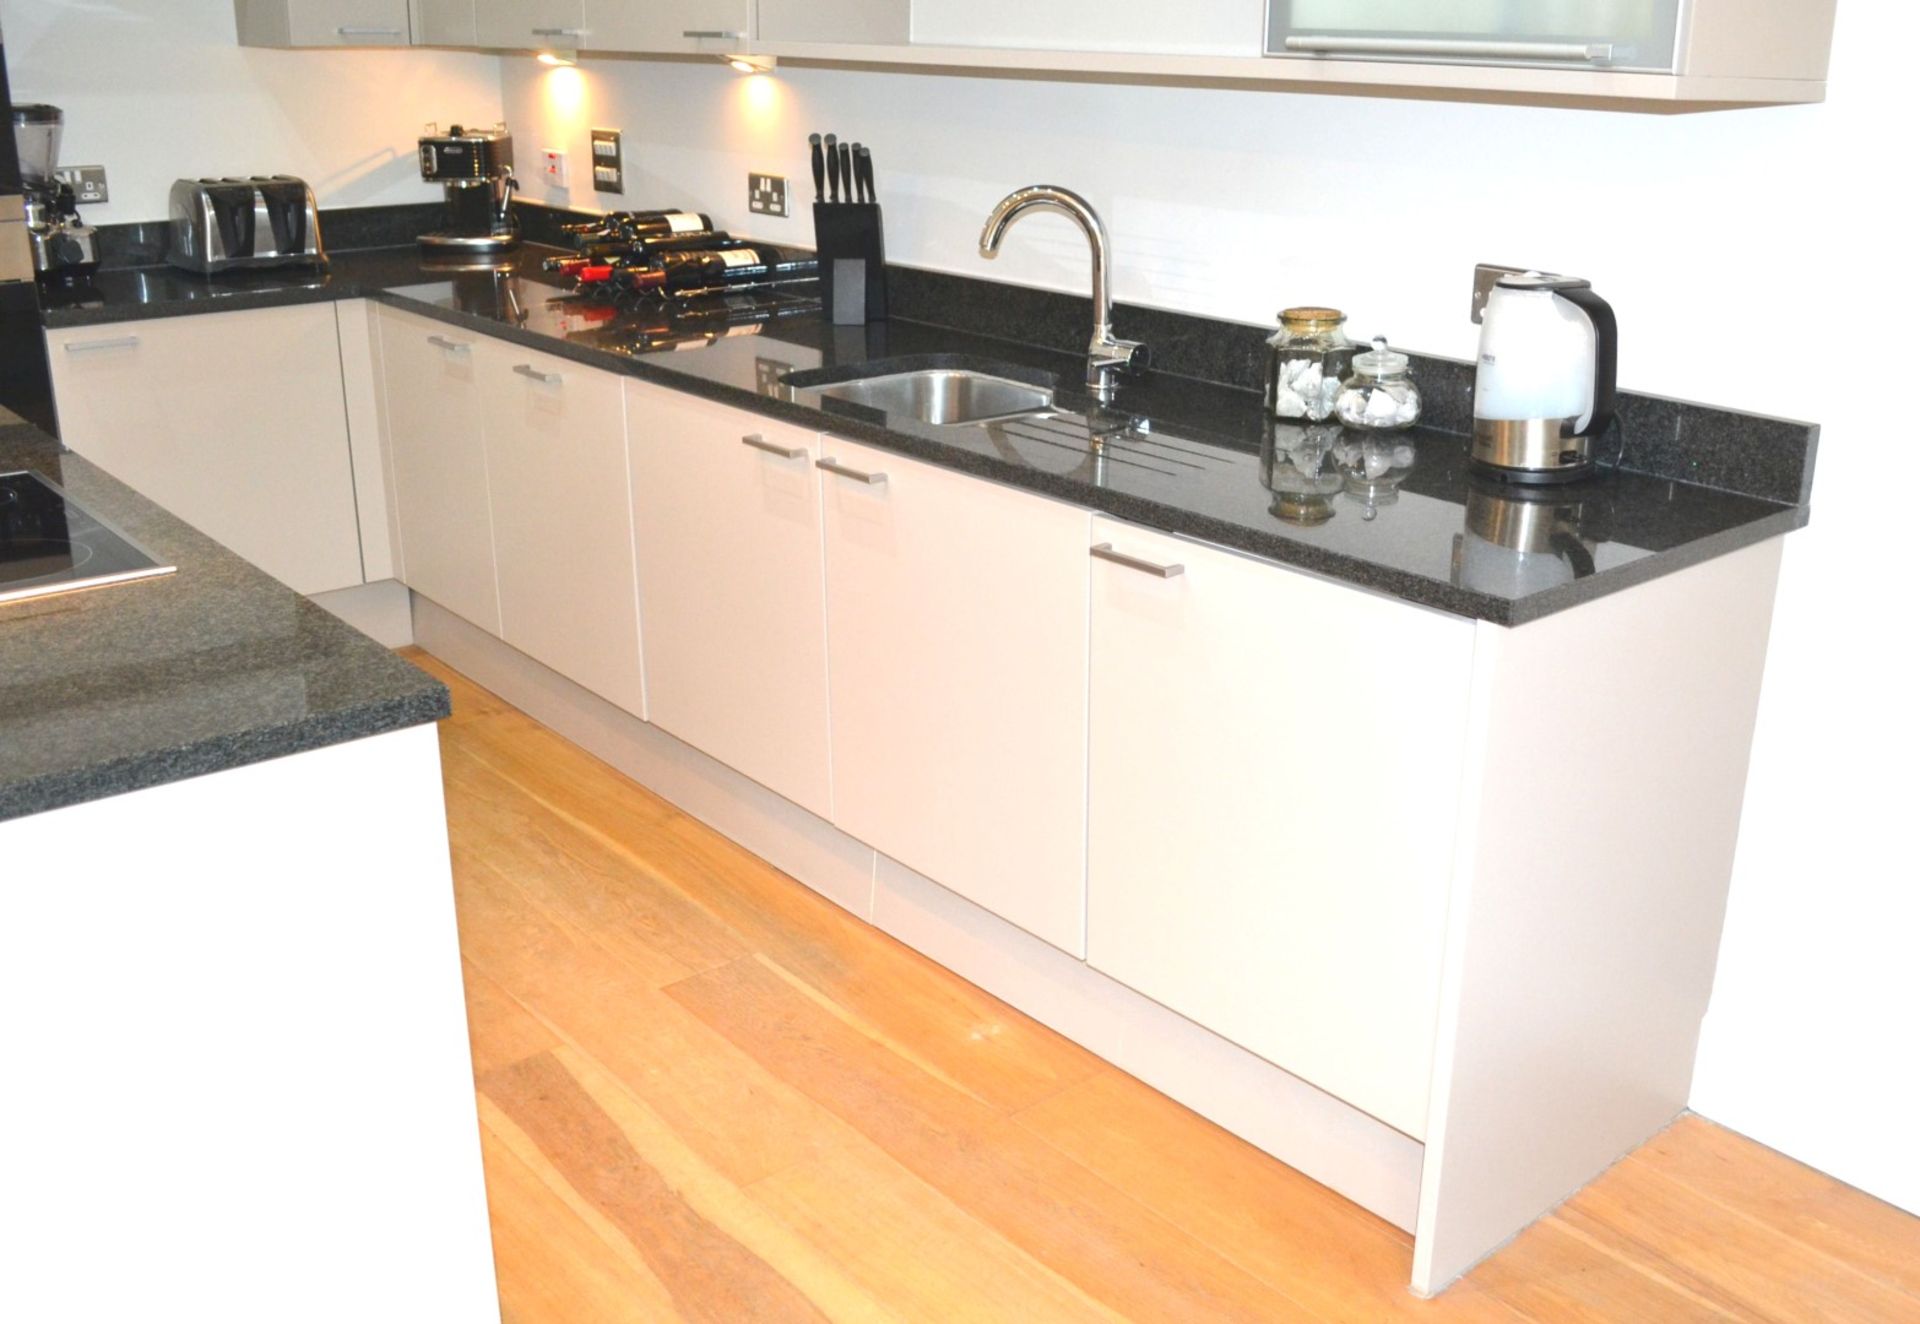 1 x Stunning Poggenpohl Kitchen With Black Granite Worktops and Miele and Siemens Appliances - In - Image 19 of 67